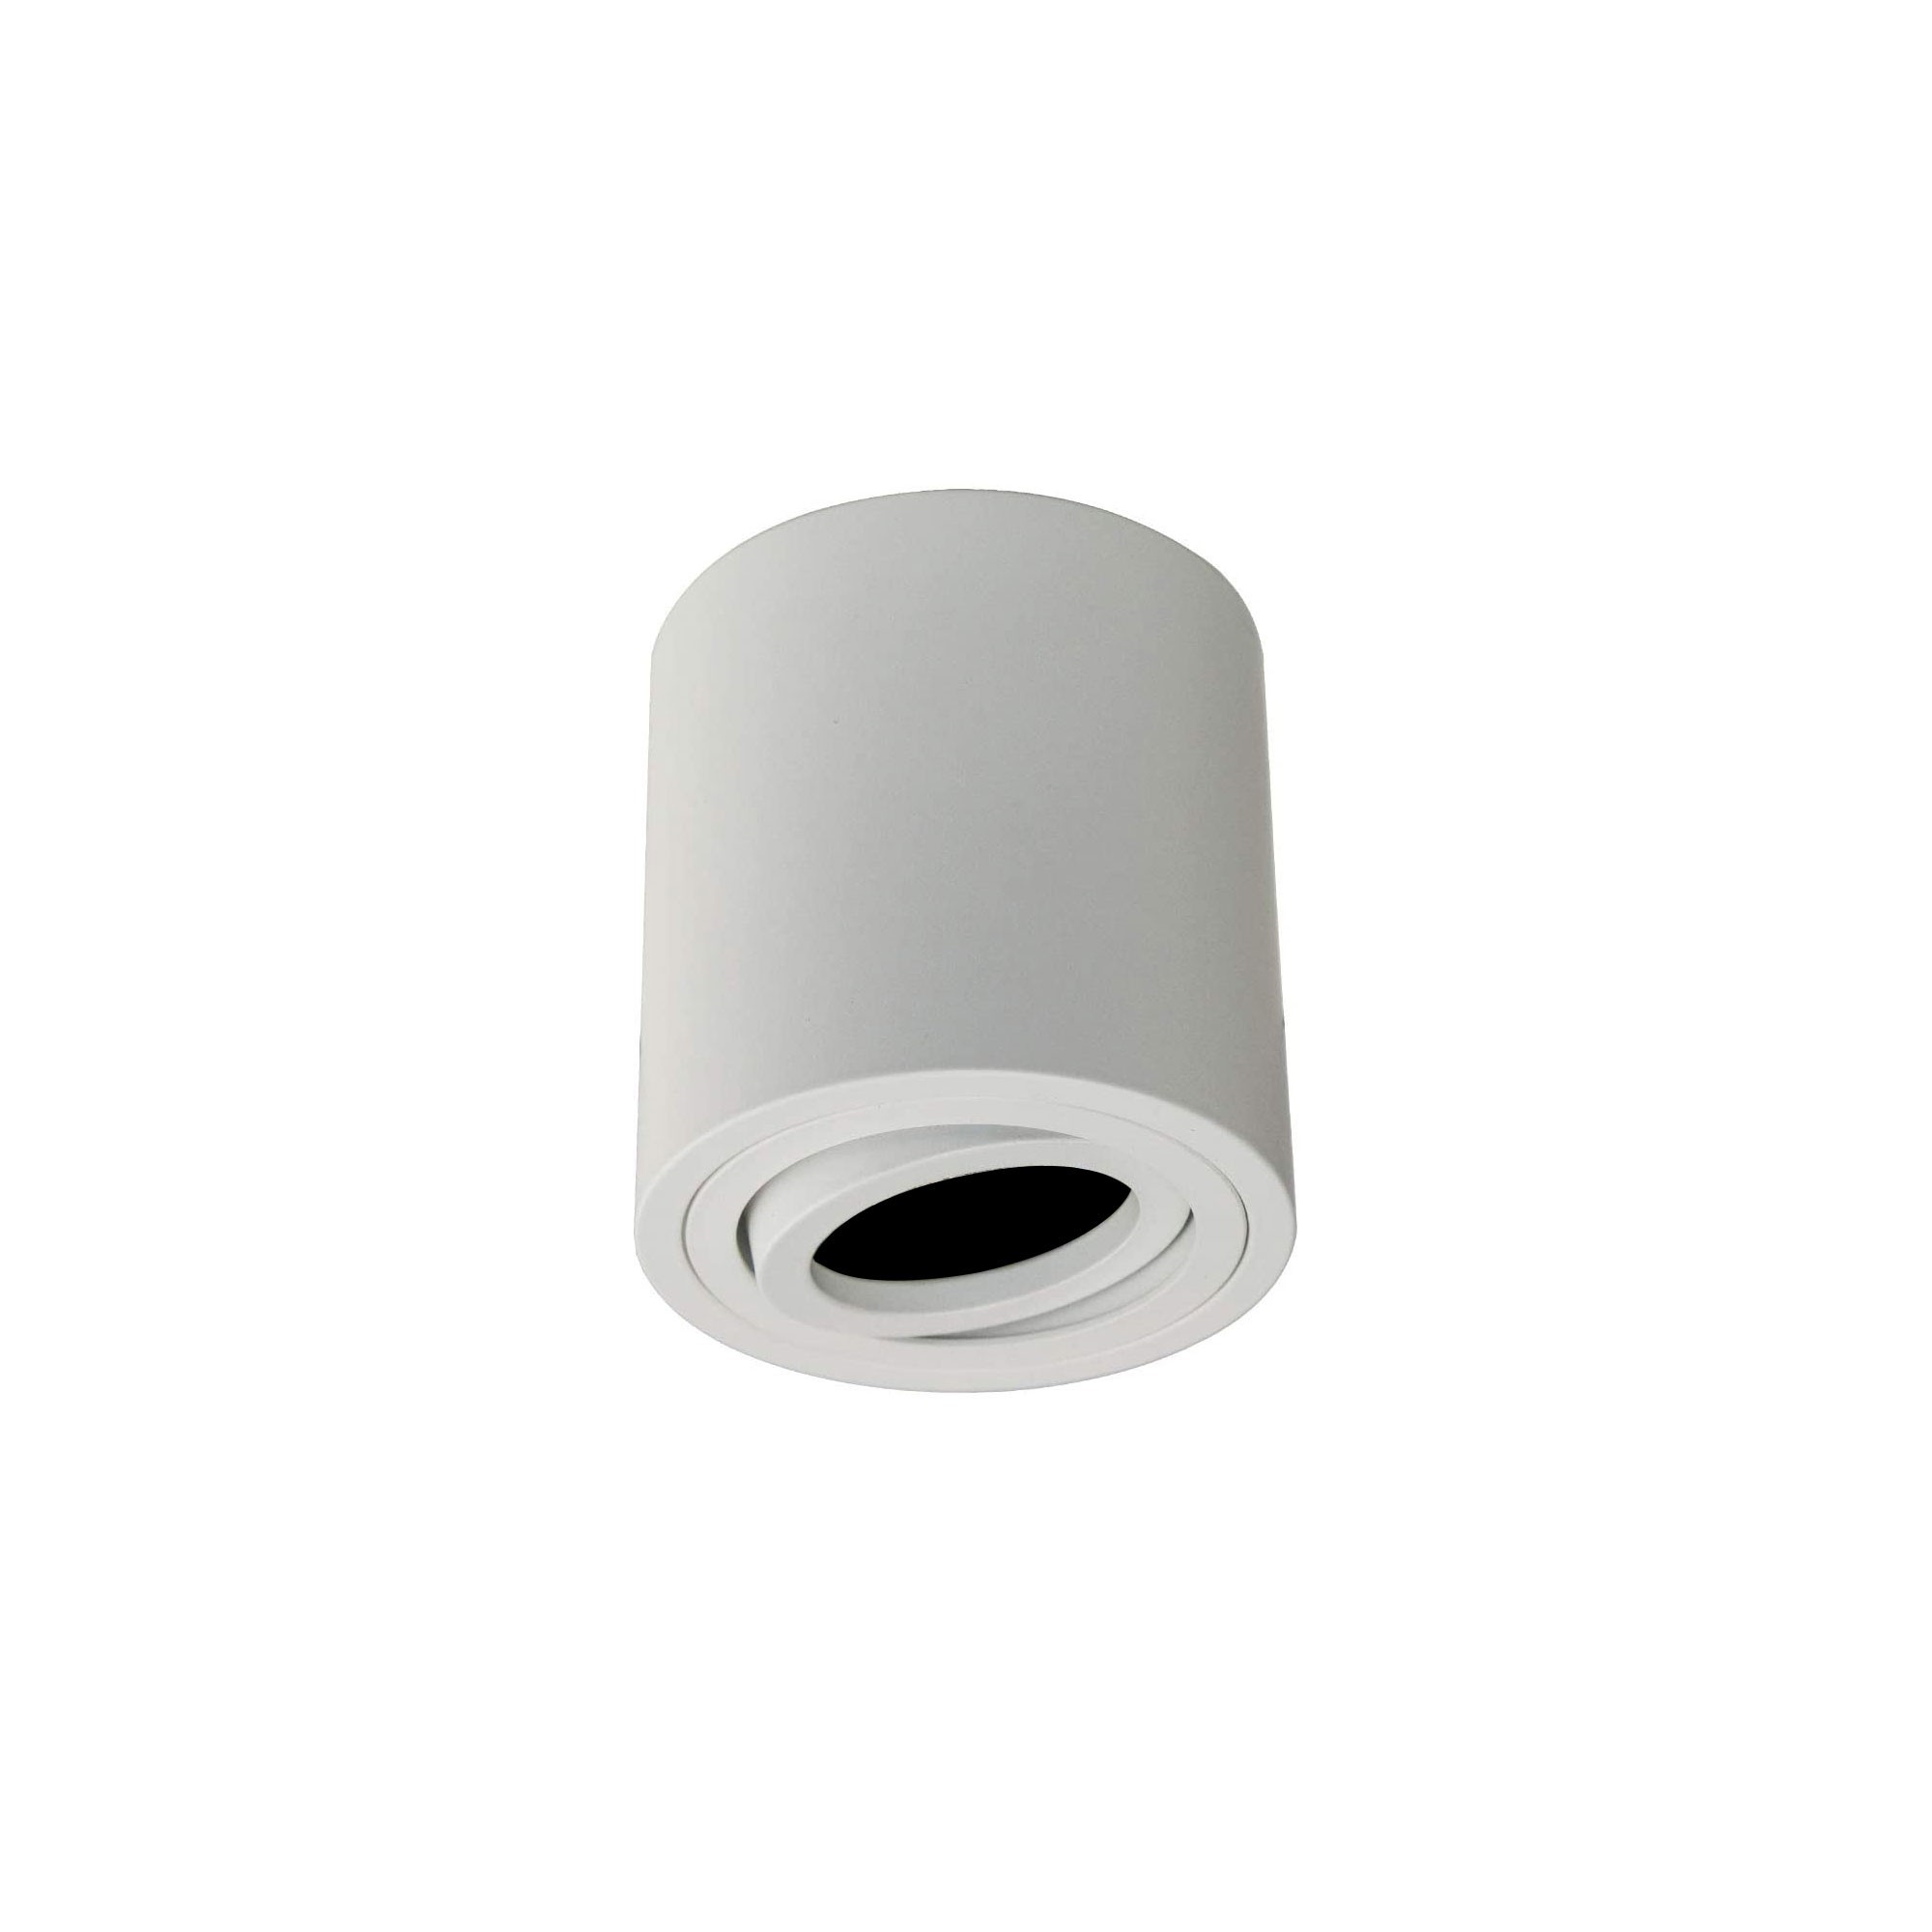 Surface-mounted ceiling spotlight swivel-mounted without bulb